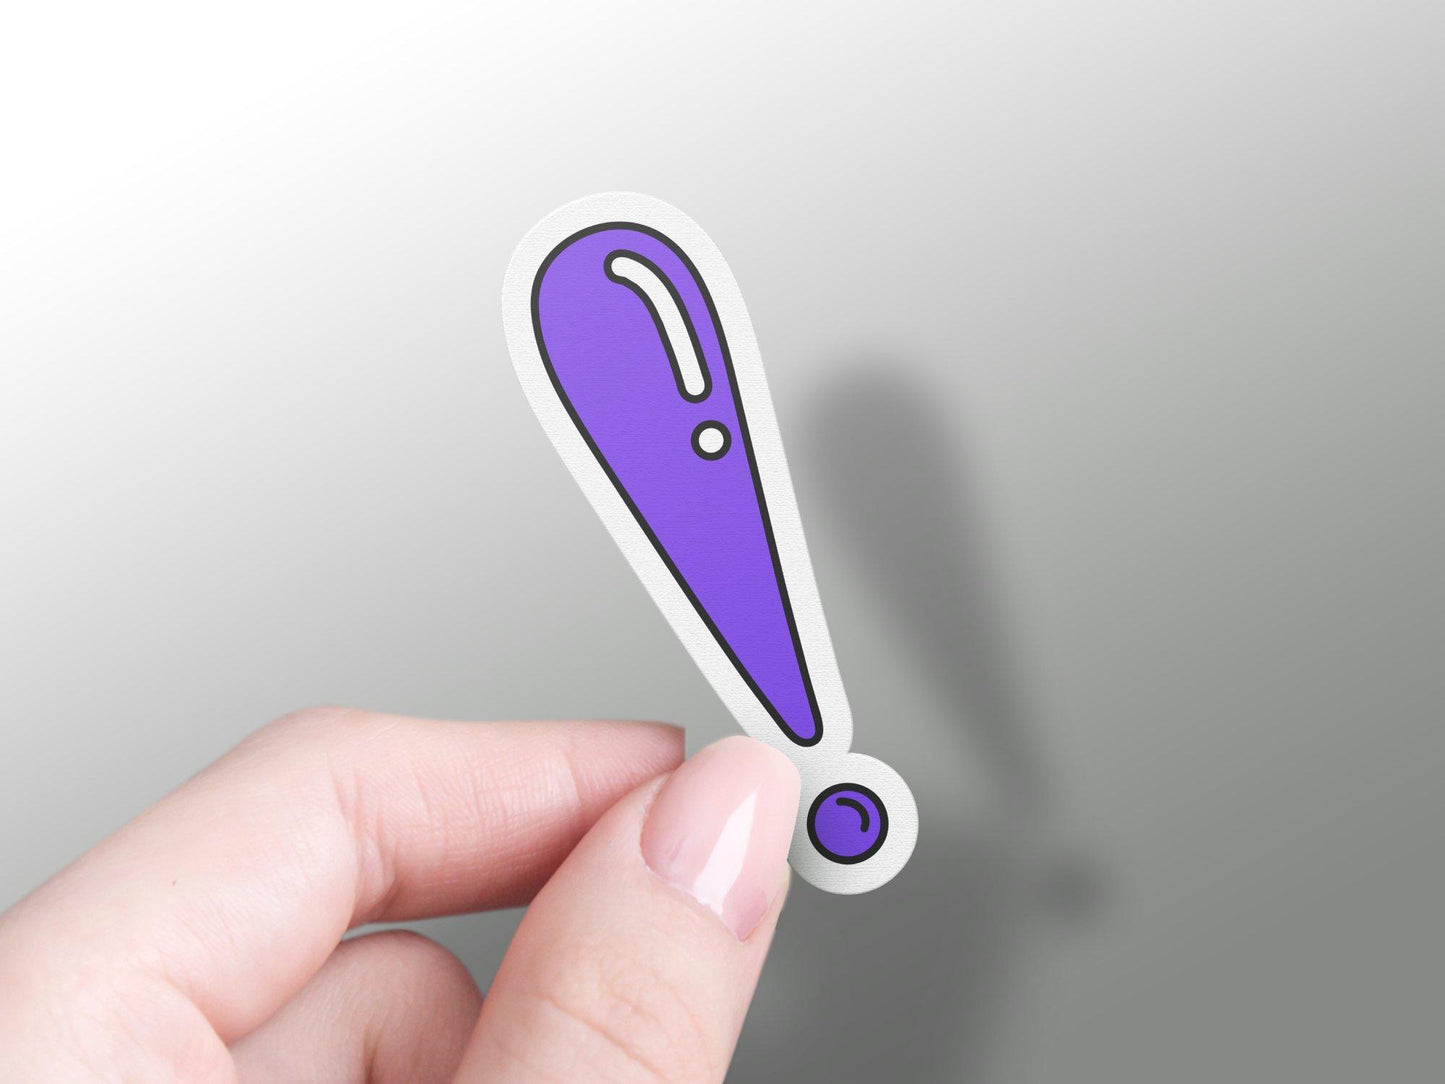 Exclamation Mark Sticker